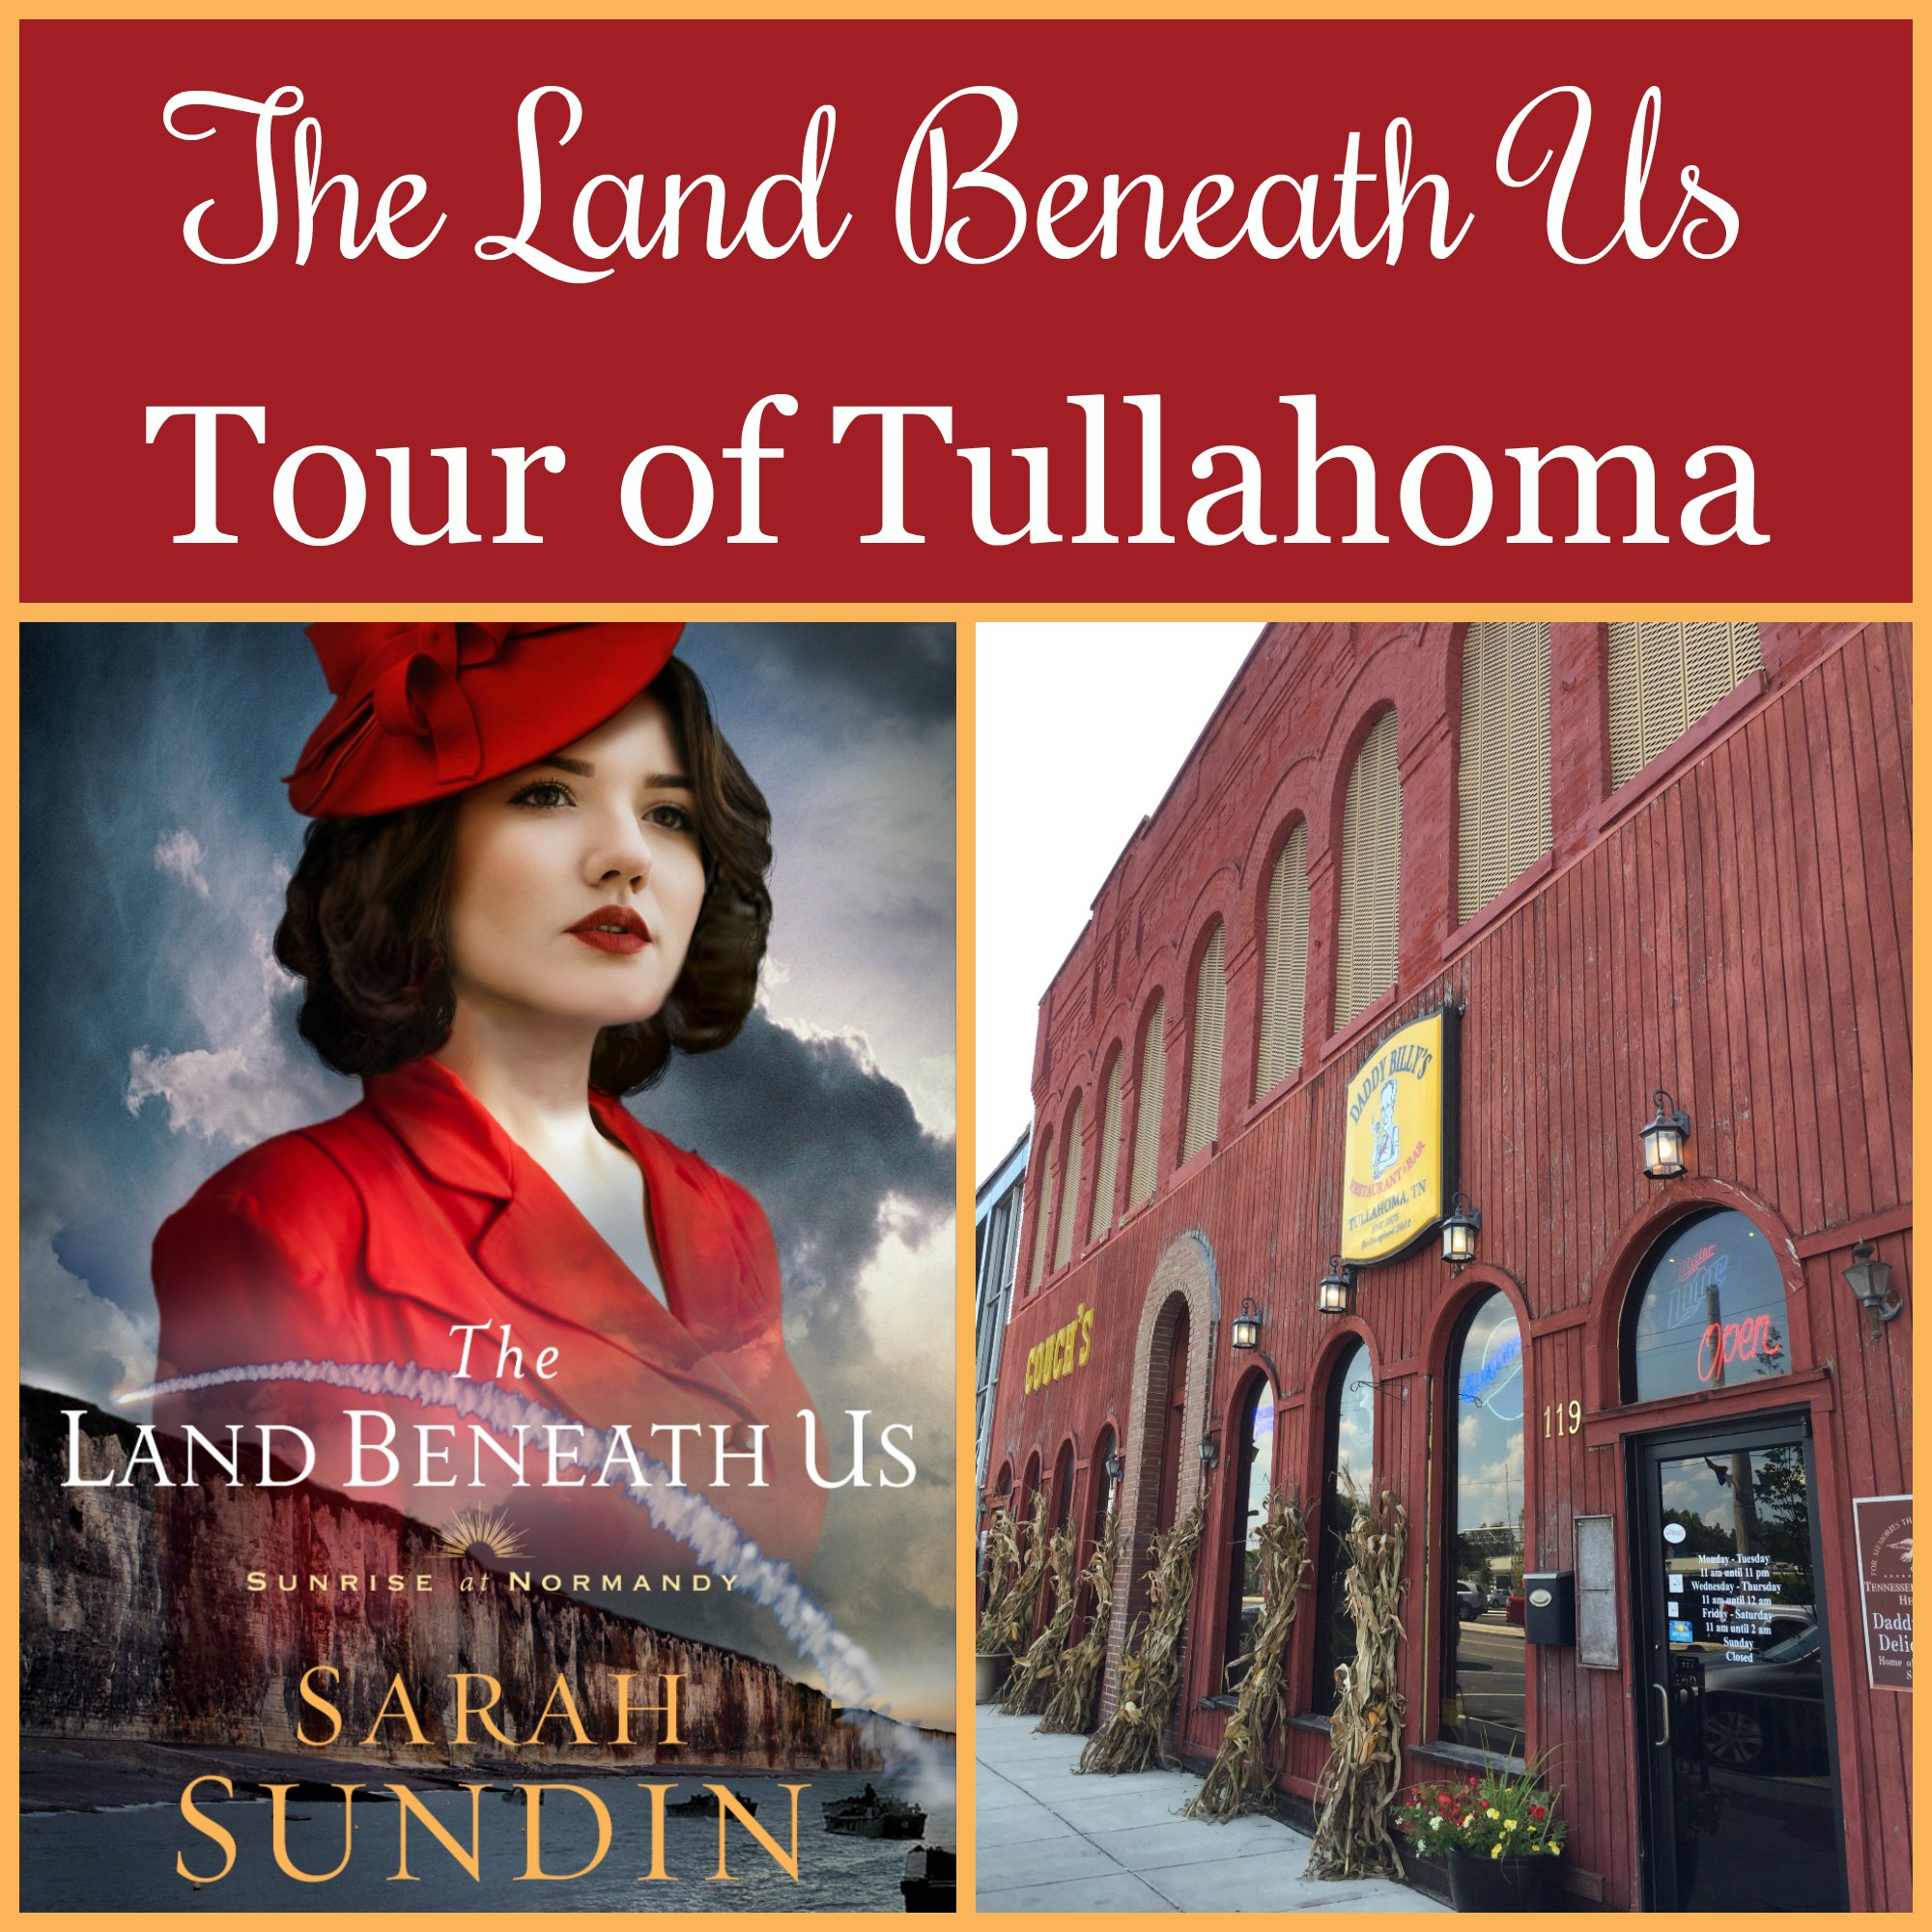 The Land Beneath Us - Tour of Tullahoma, Tennessee